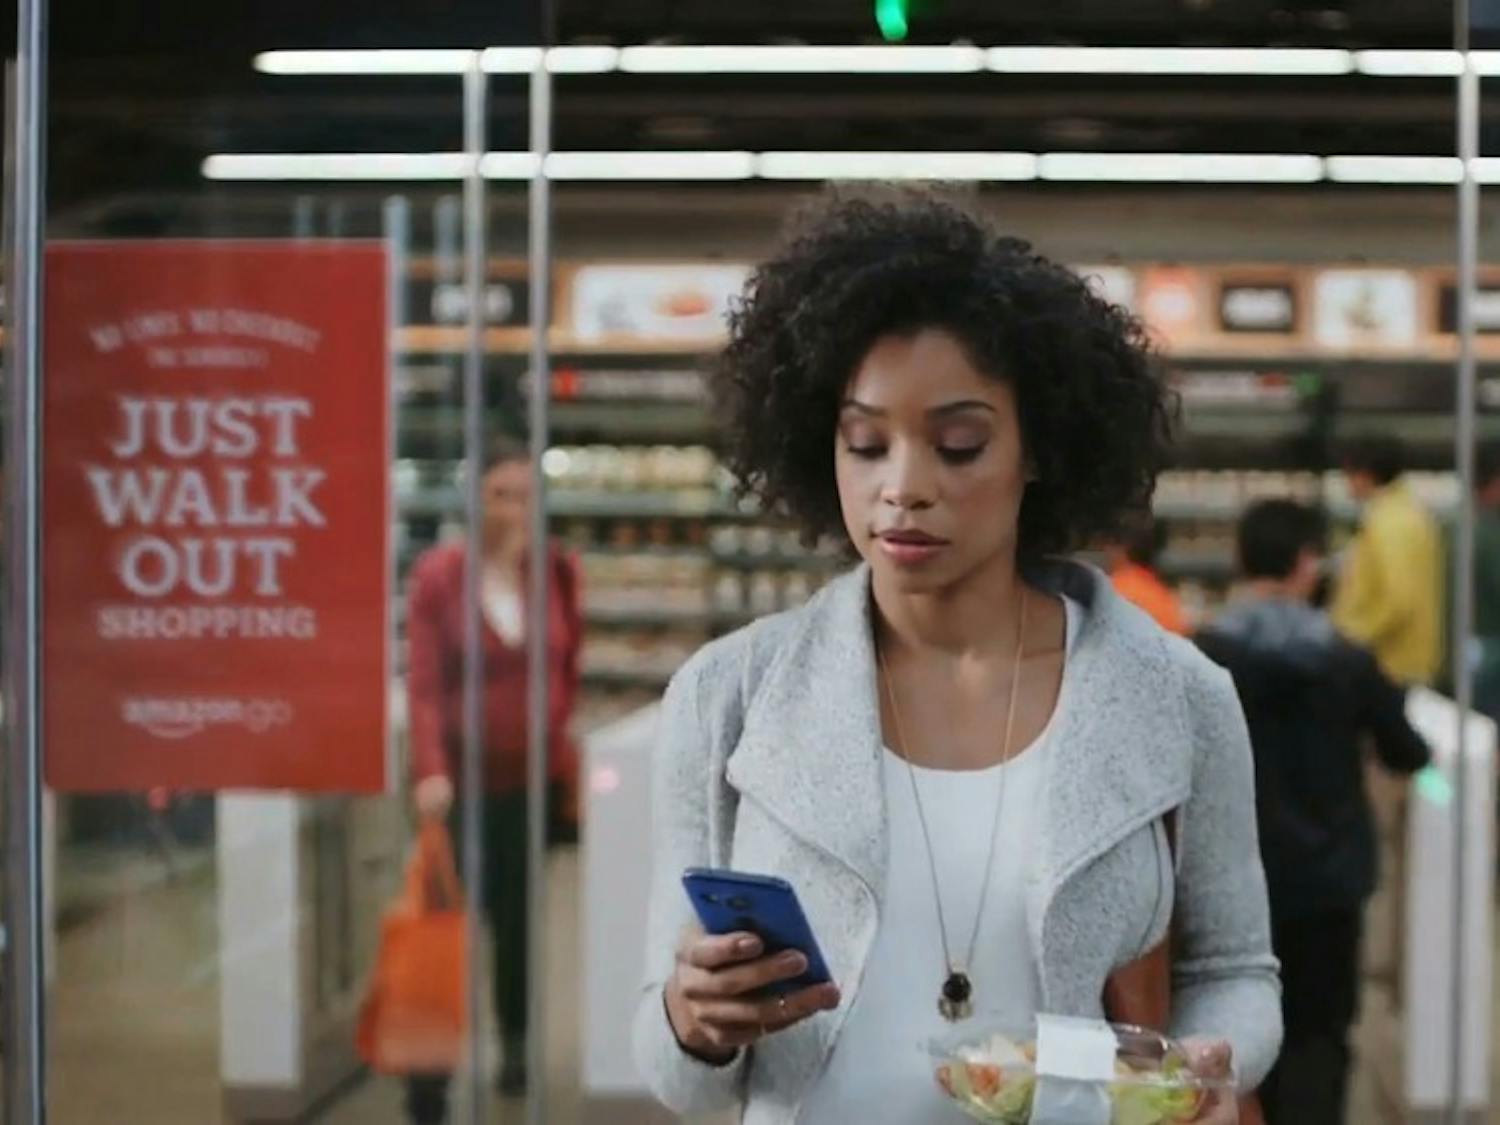 Amazon Go is a new kind of store featuring the world's most advanced shopping technology. No lines, no checkout 